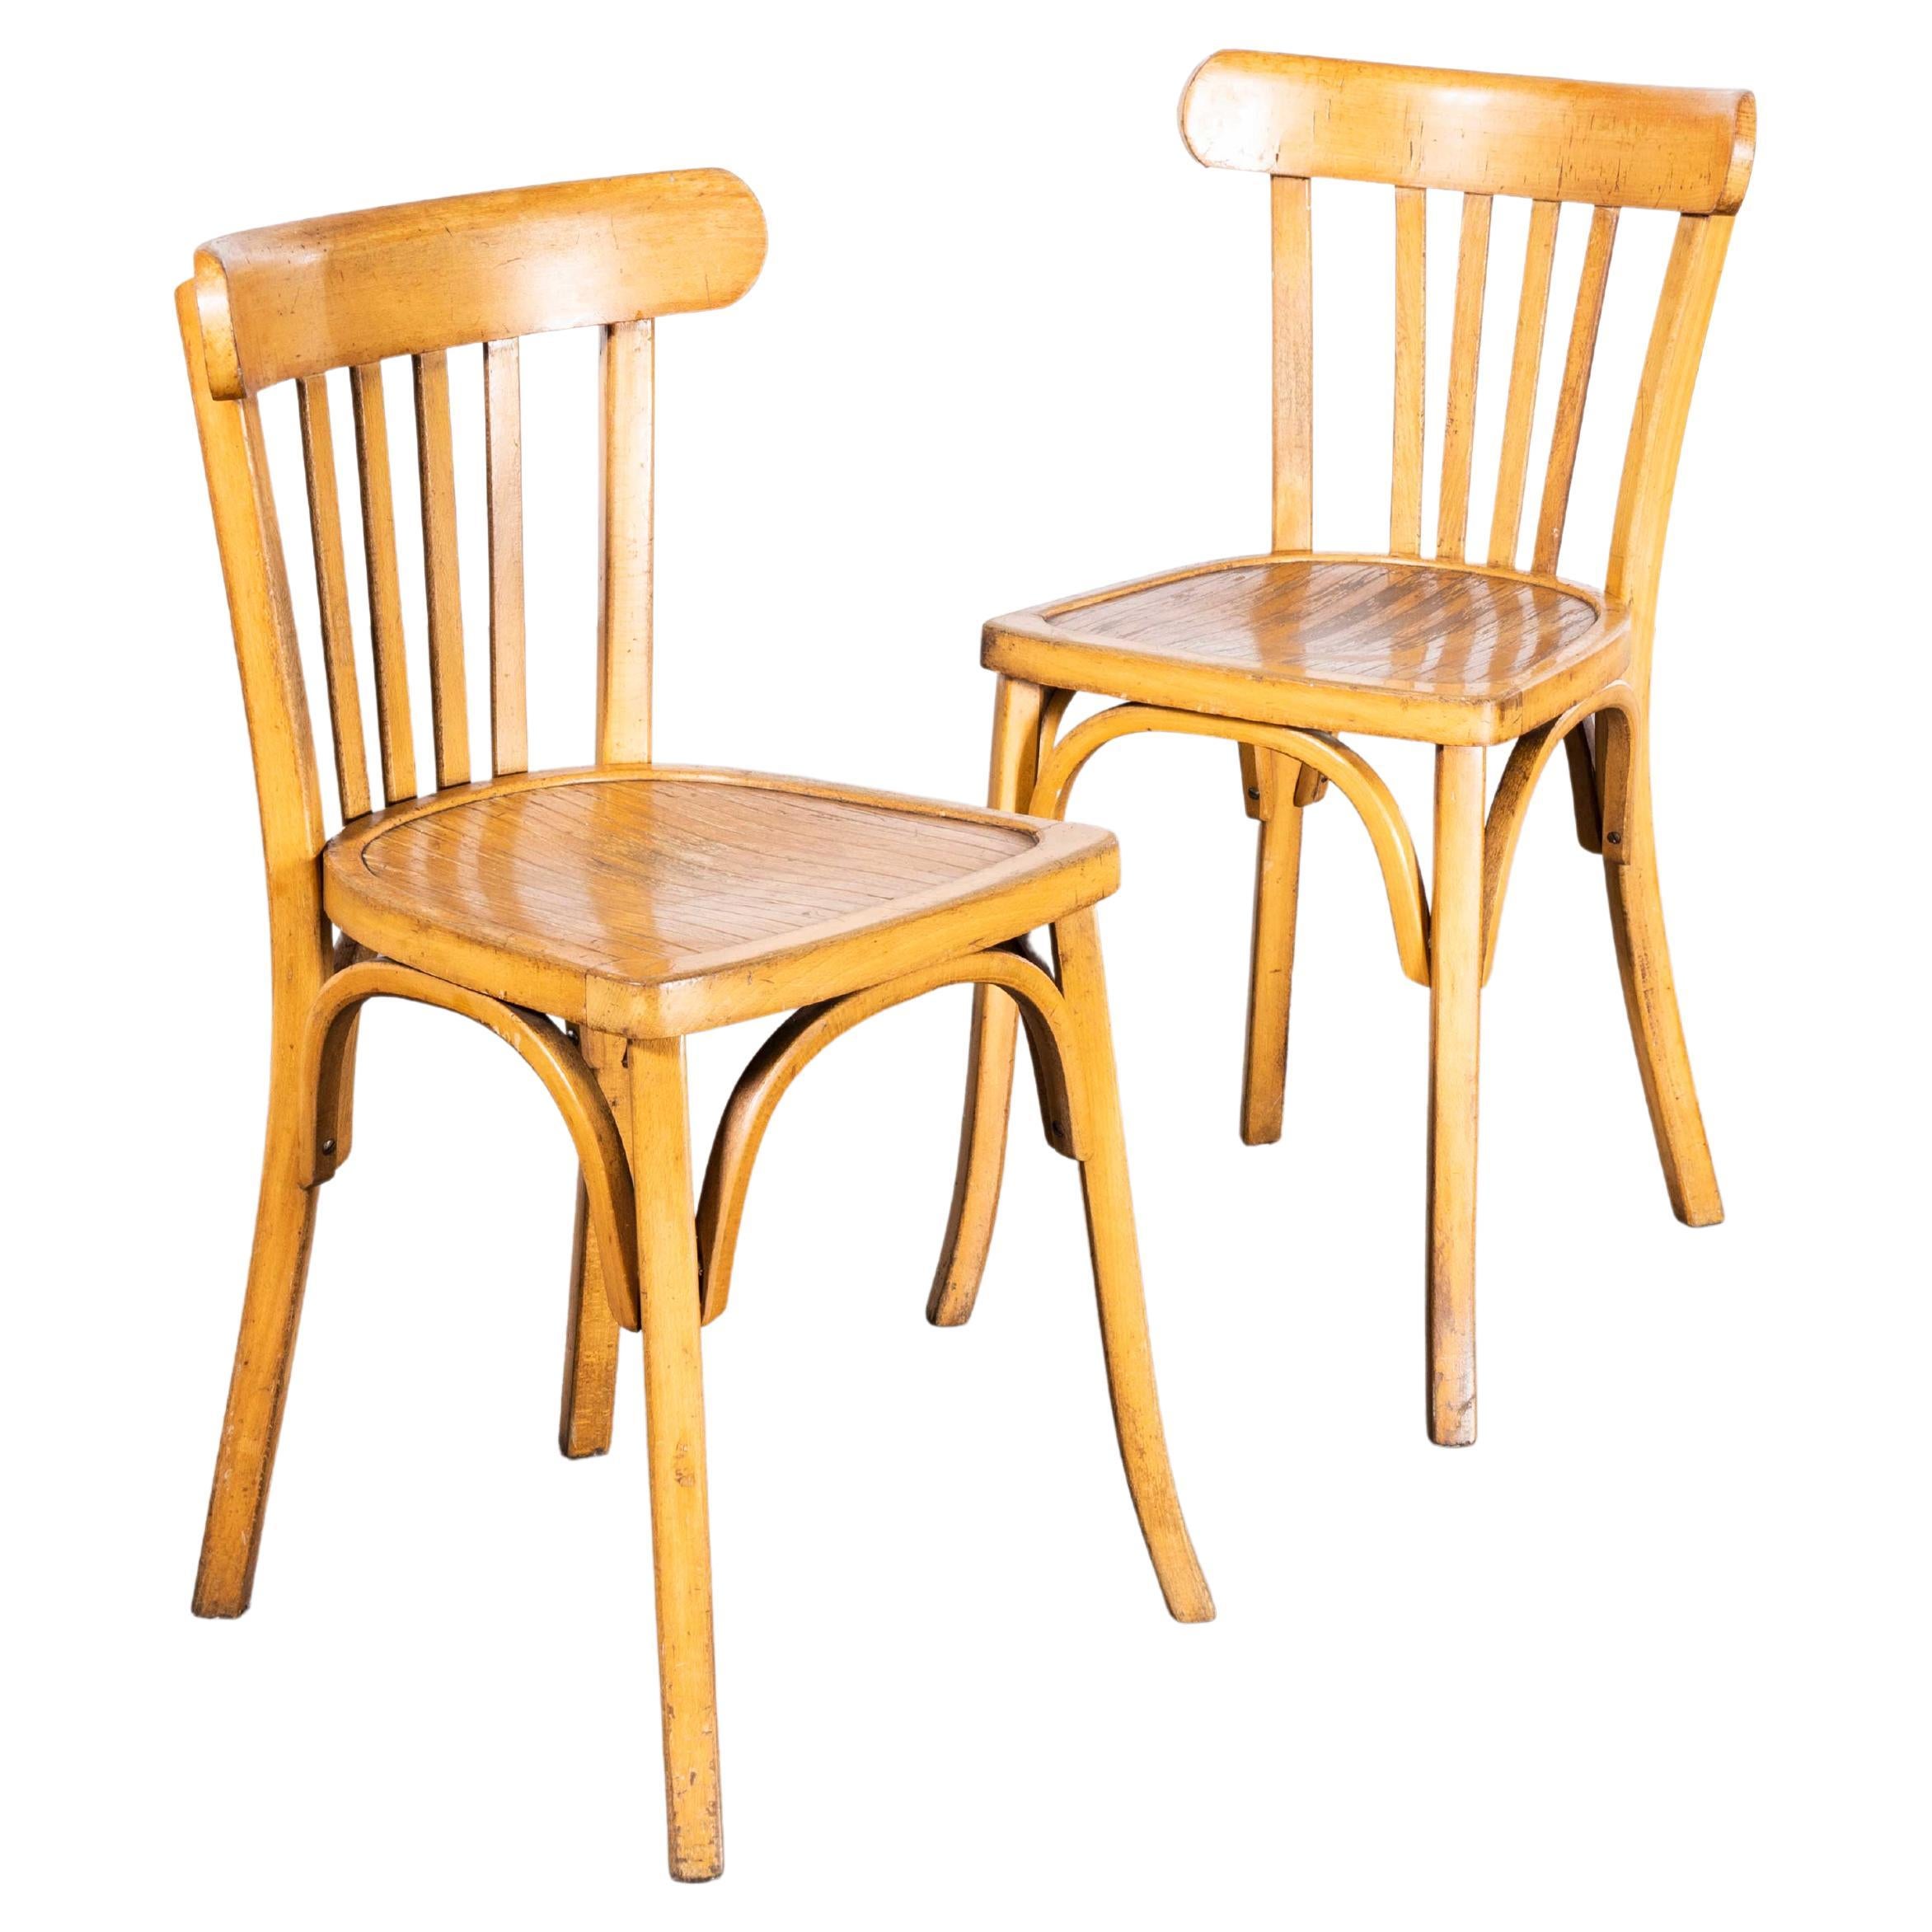 1950s Luterma Blonde Oak Bentwood Dining Chair - Set of Pair For Sale